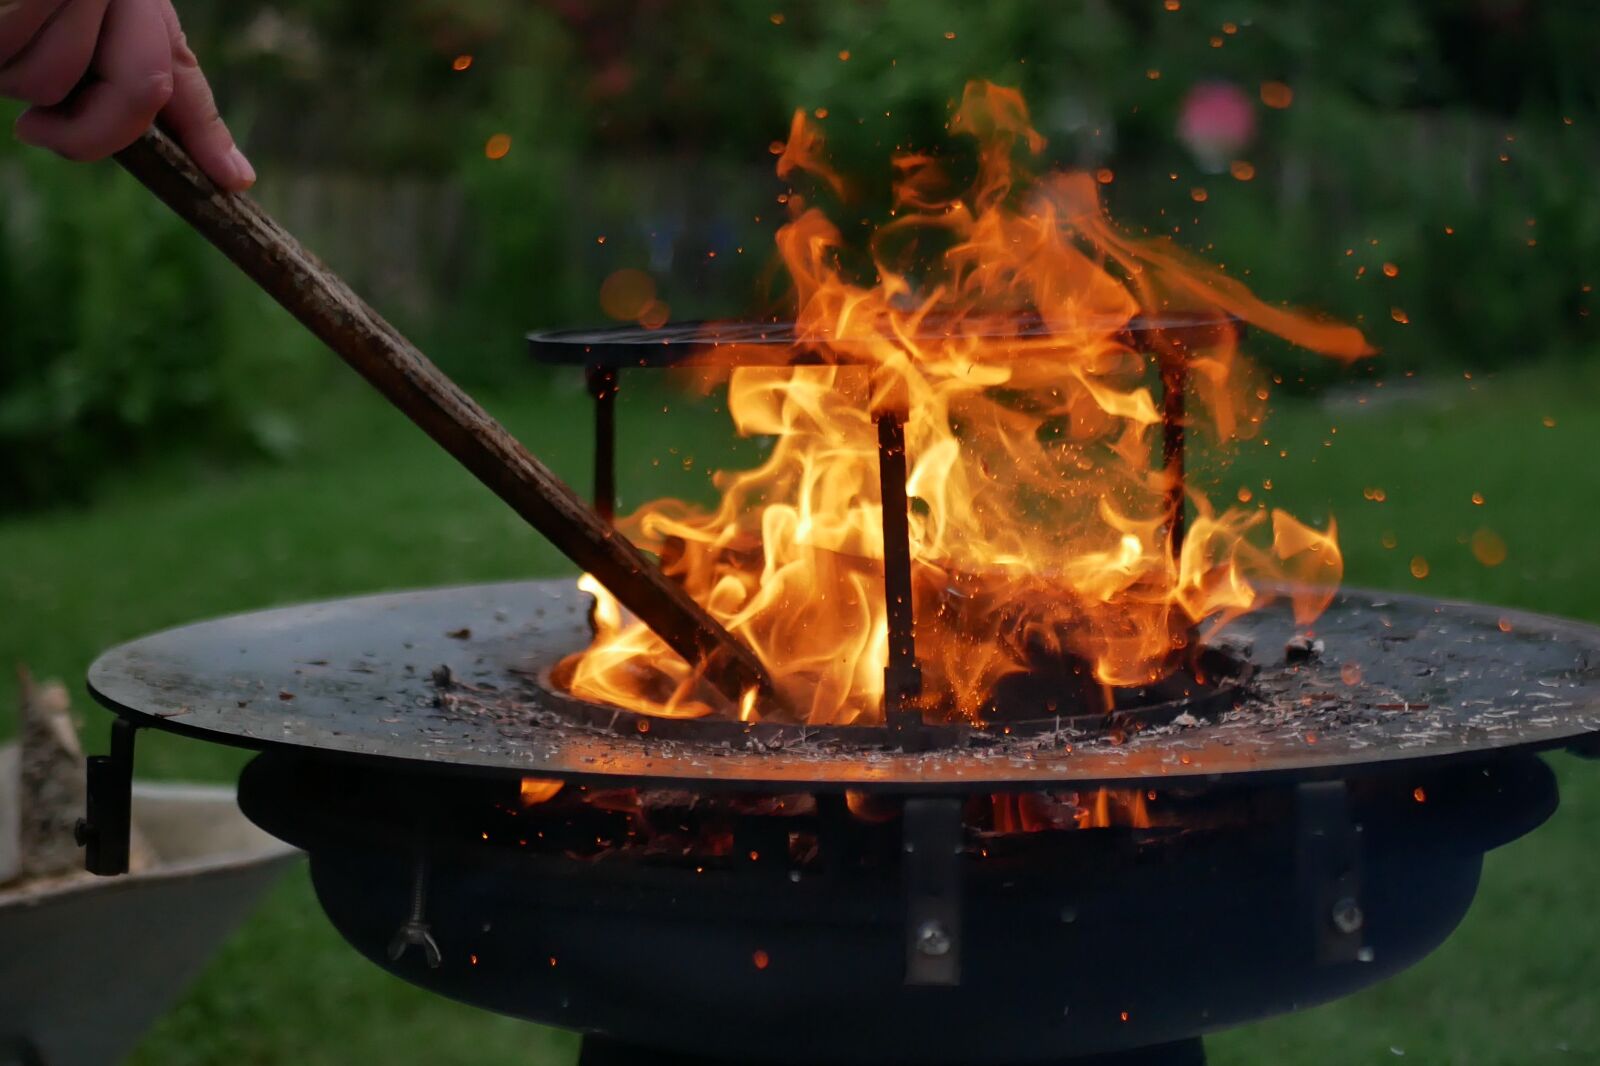 Panasonic DMC-G81 sample photo. Fire, grill fire, barbecue photography